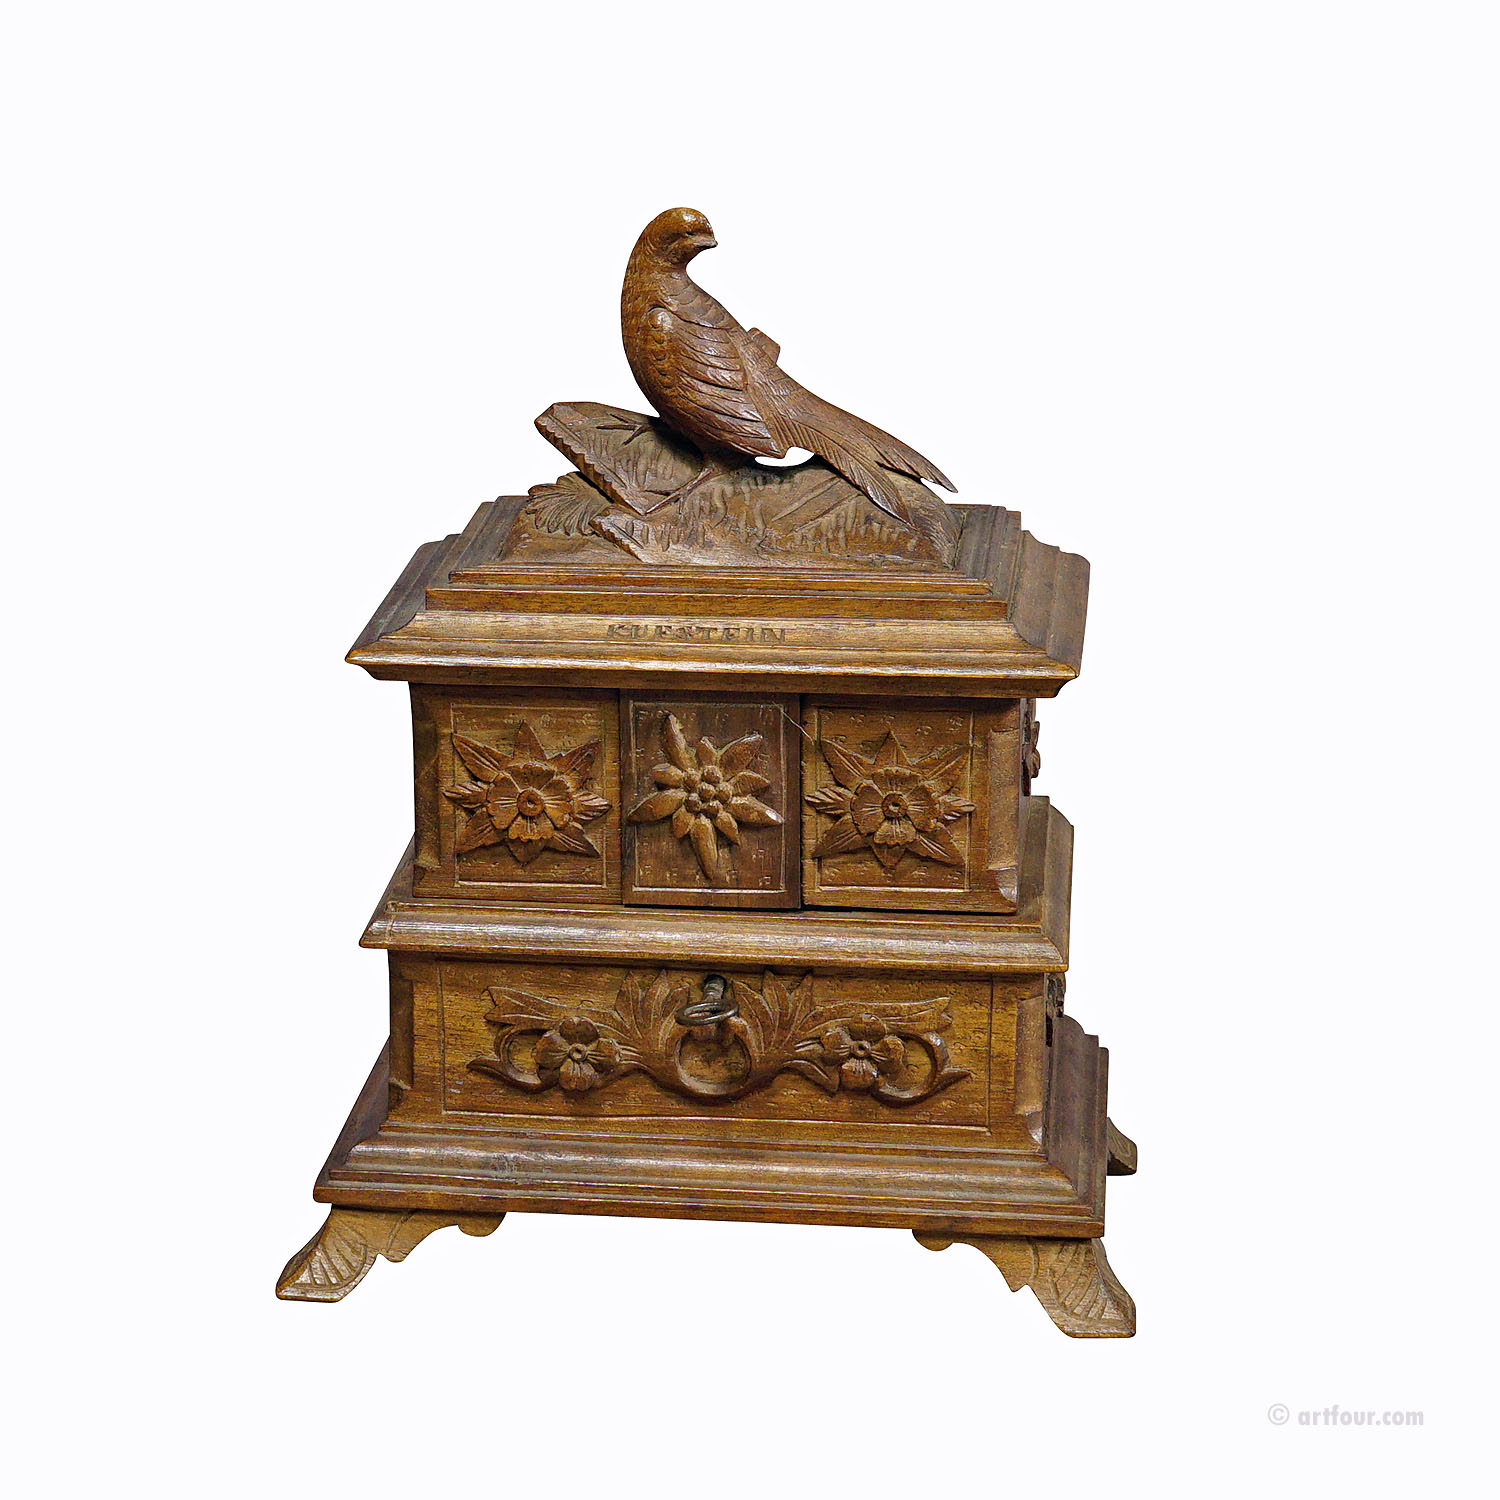 Antique Wooden Carved Edelweis Jewelry Box with Bird, Brienz ca 1900